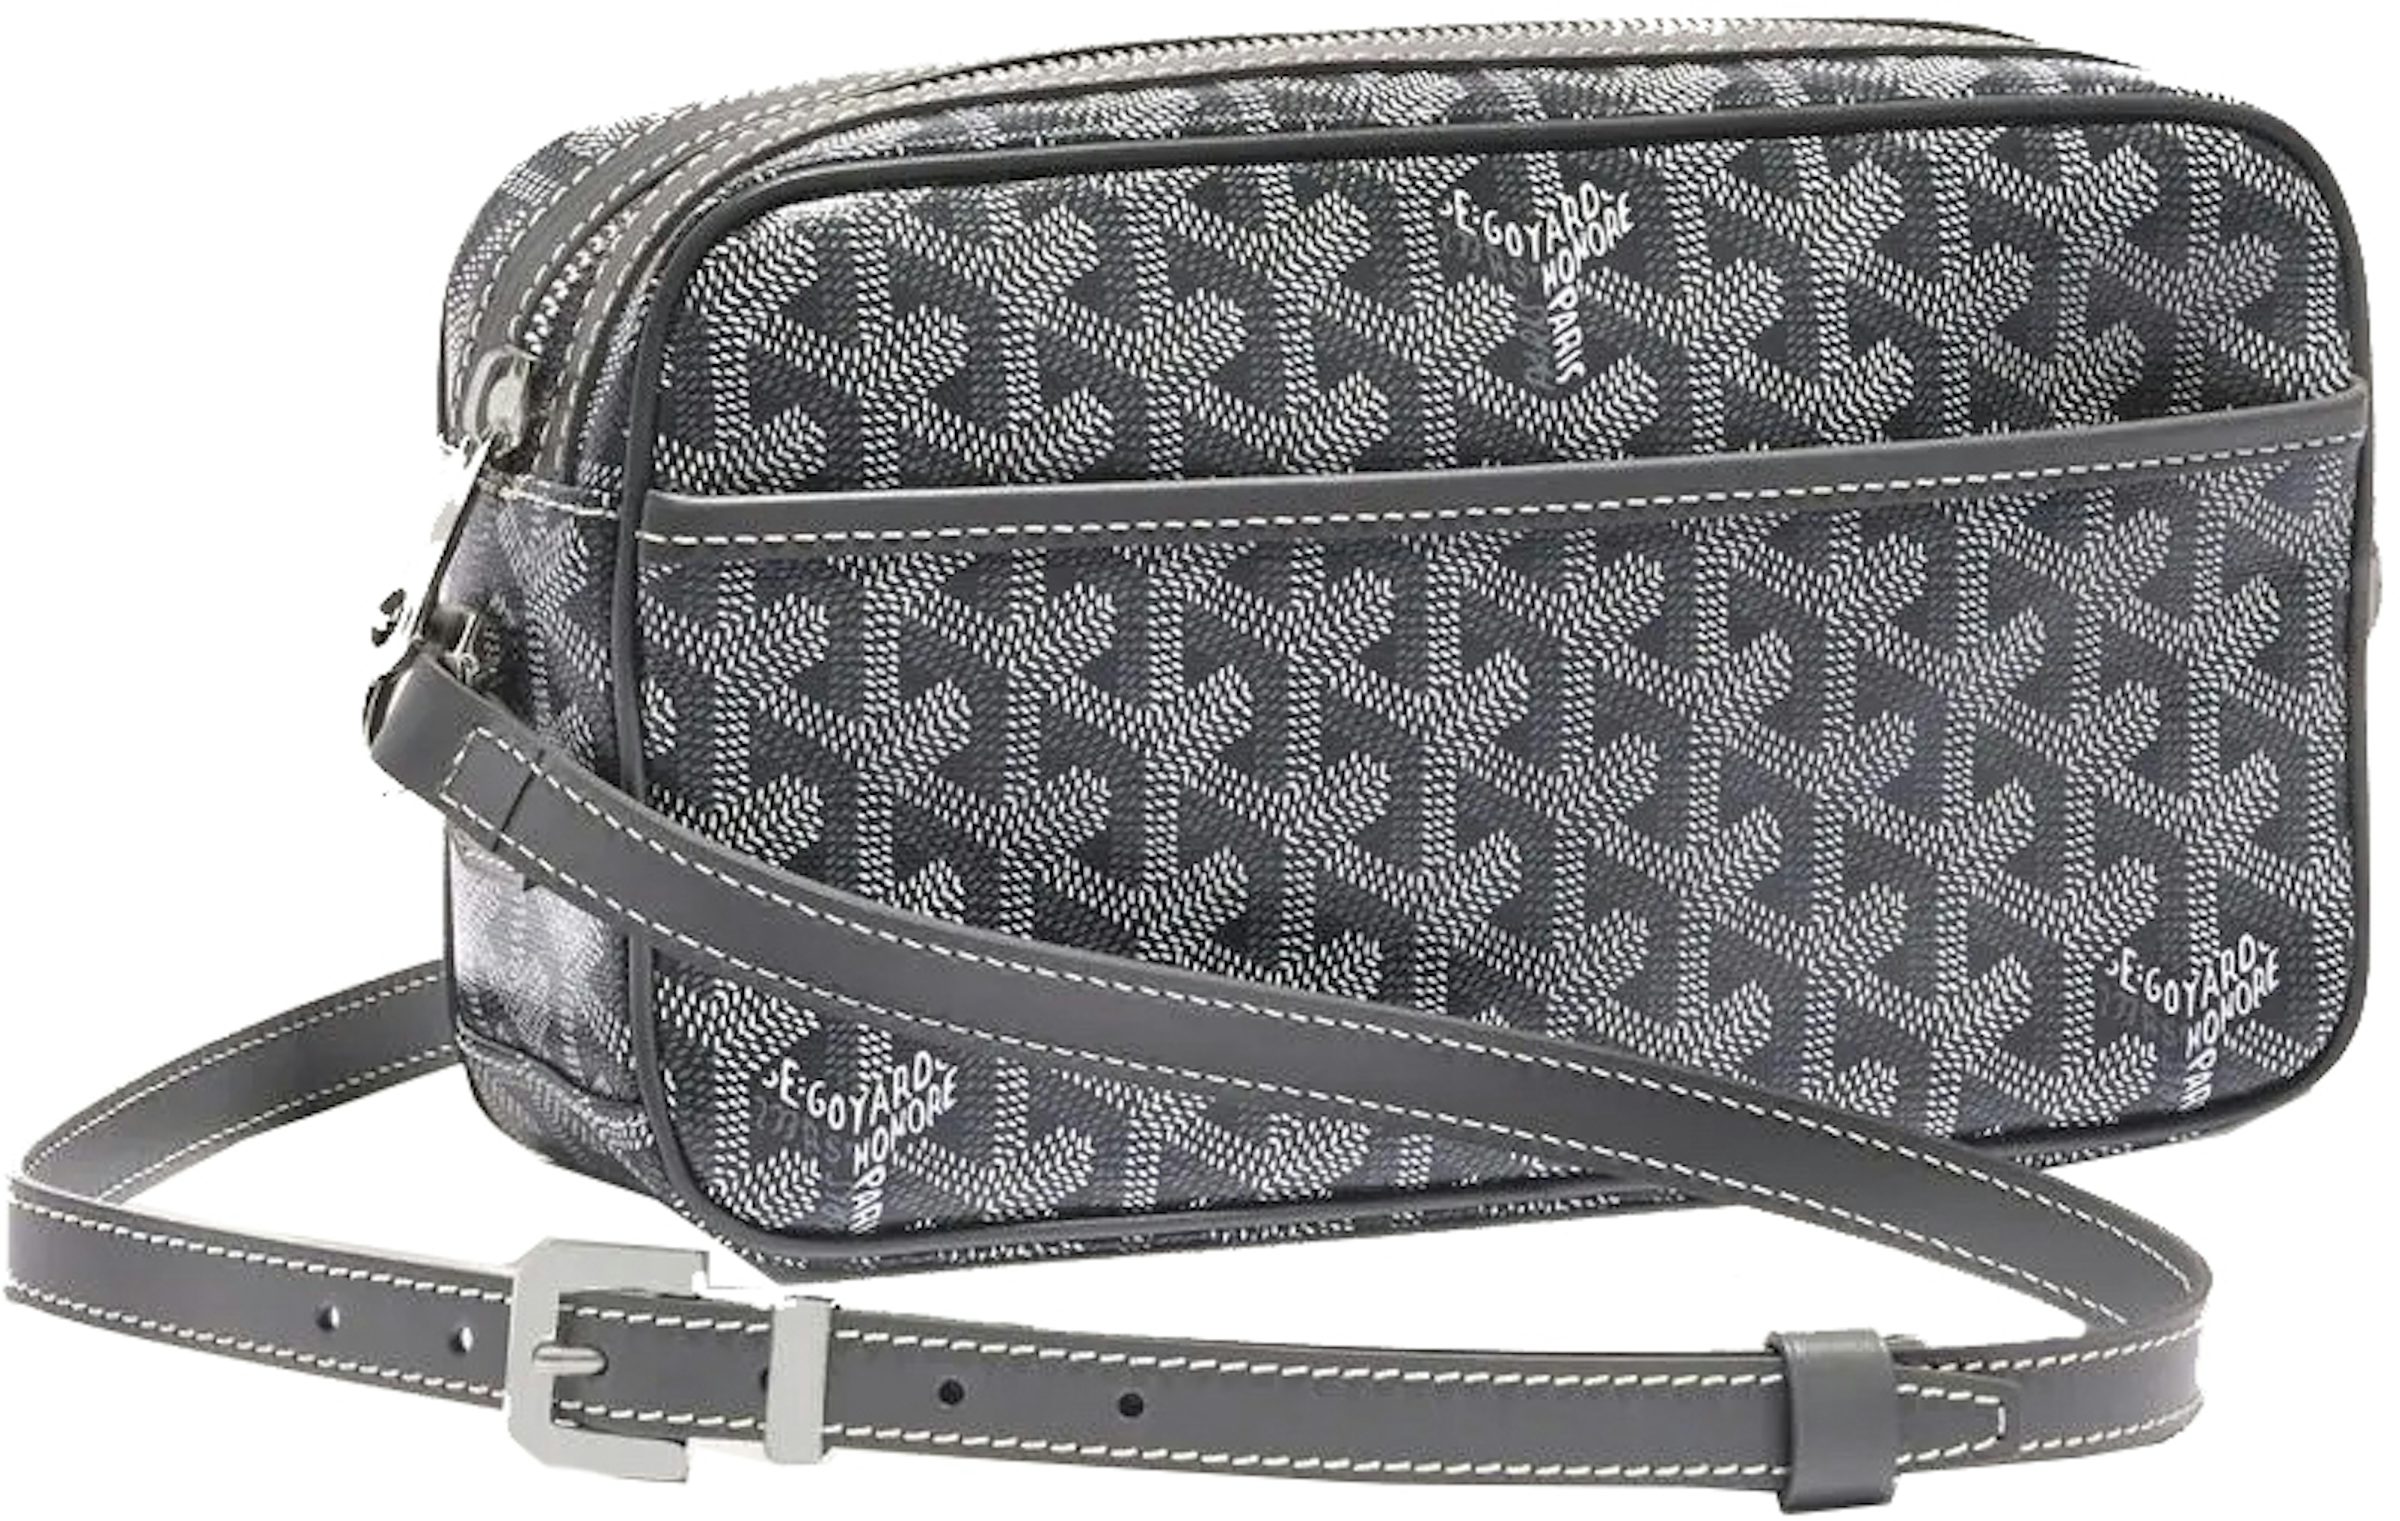 Goyard Cap-Vert PM Bag Gray in Coated Canvas/Calfskin Leather with